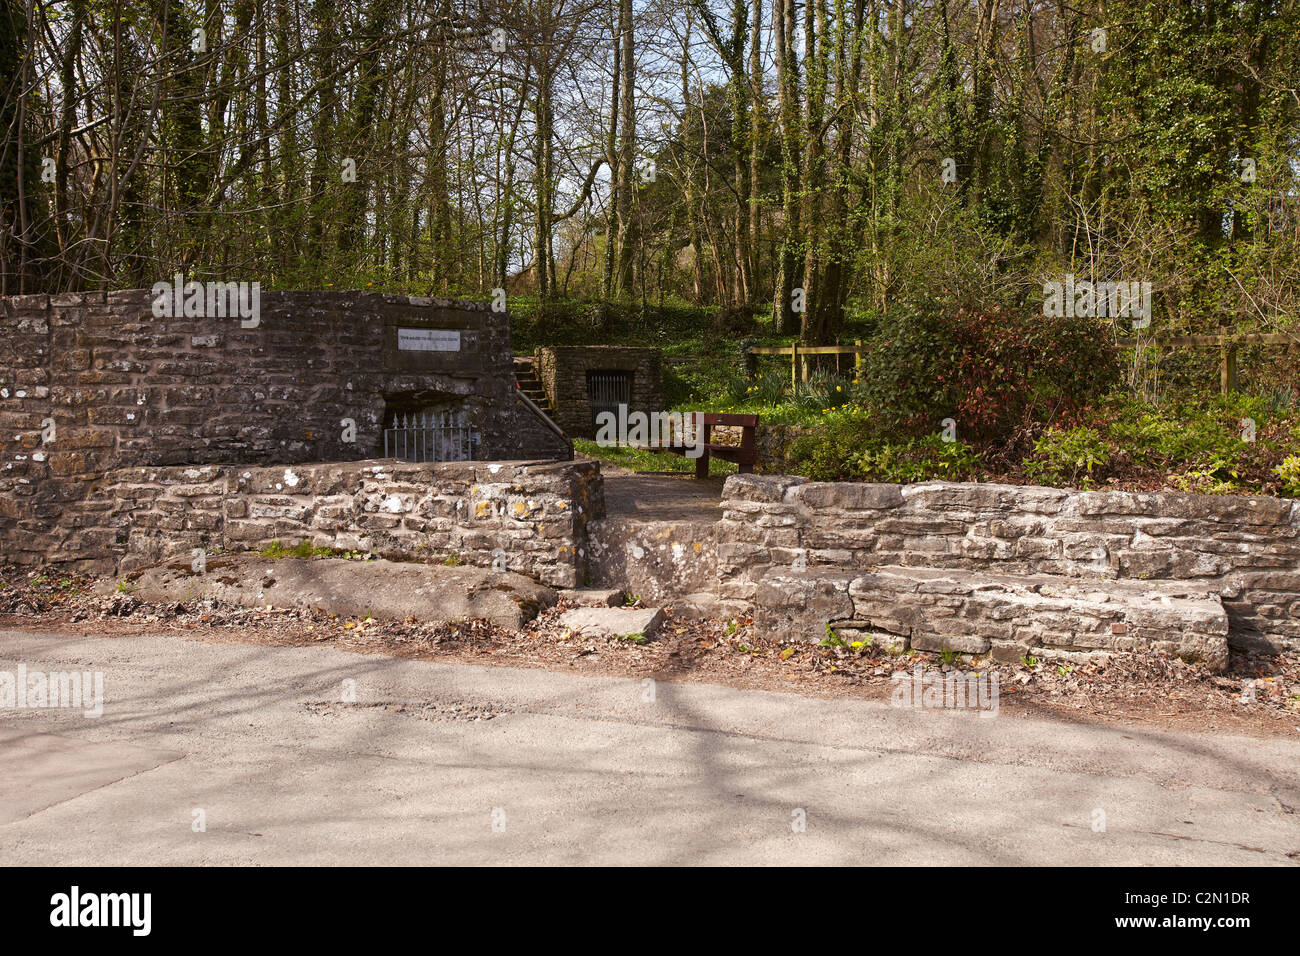 Salmons Well, a group of three wells near Penllyn in the Vale of Glamorgan, South Wales, UK Stock Photo